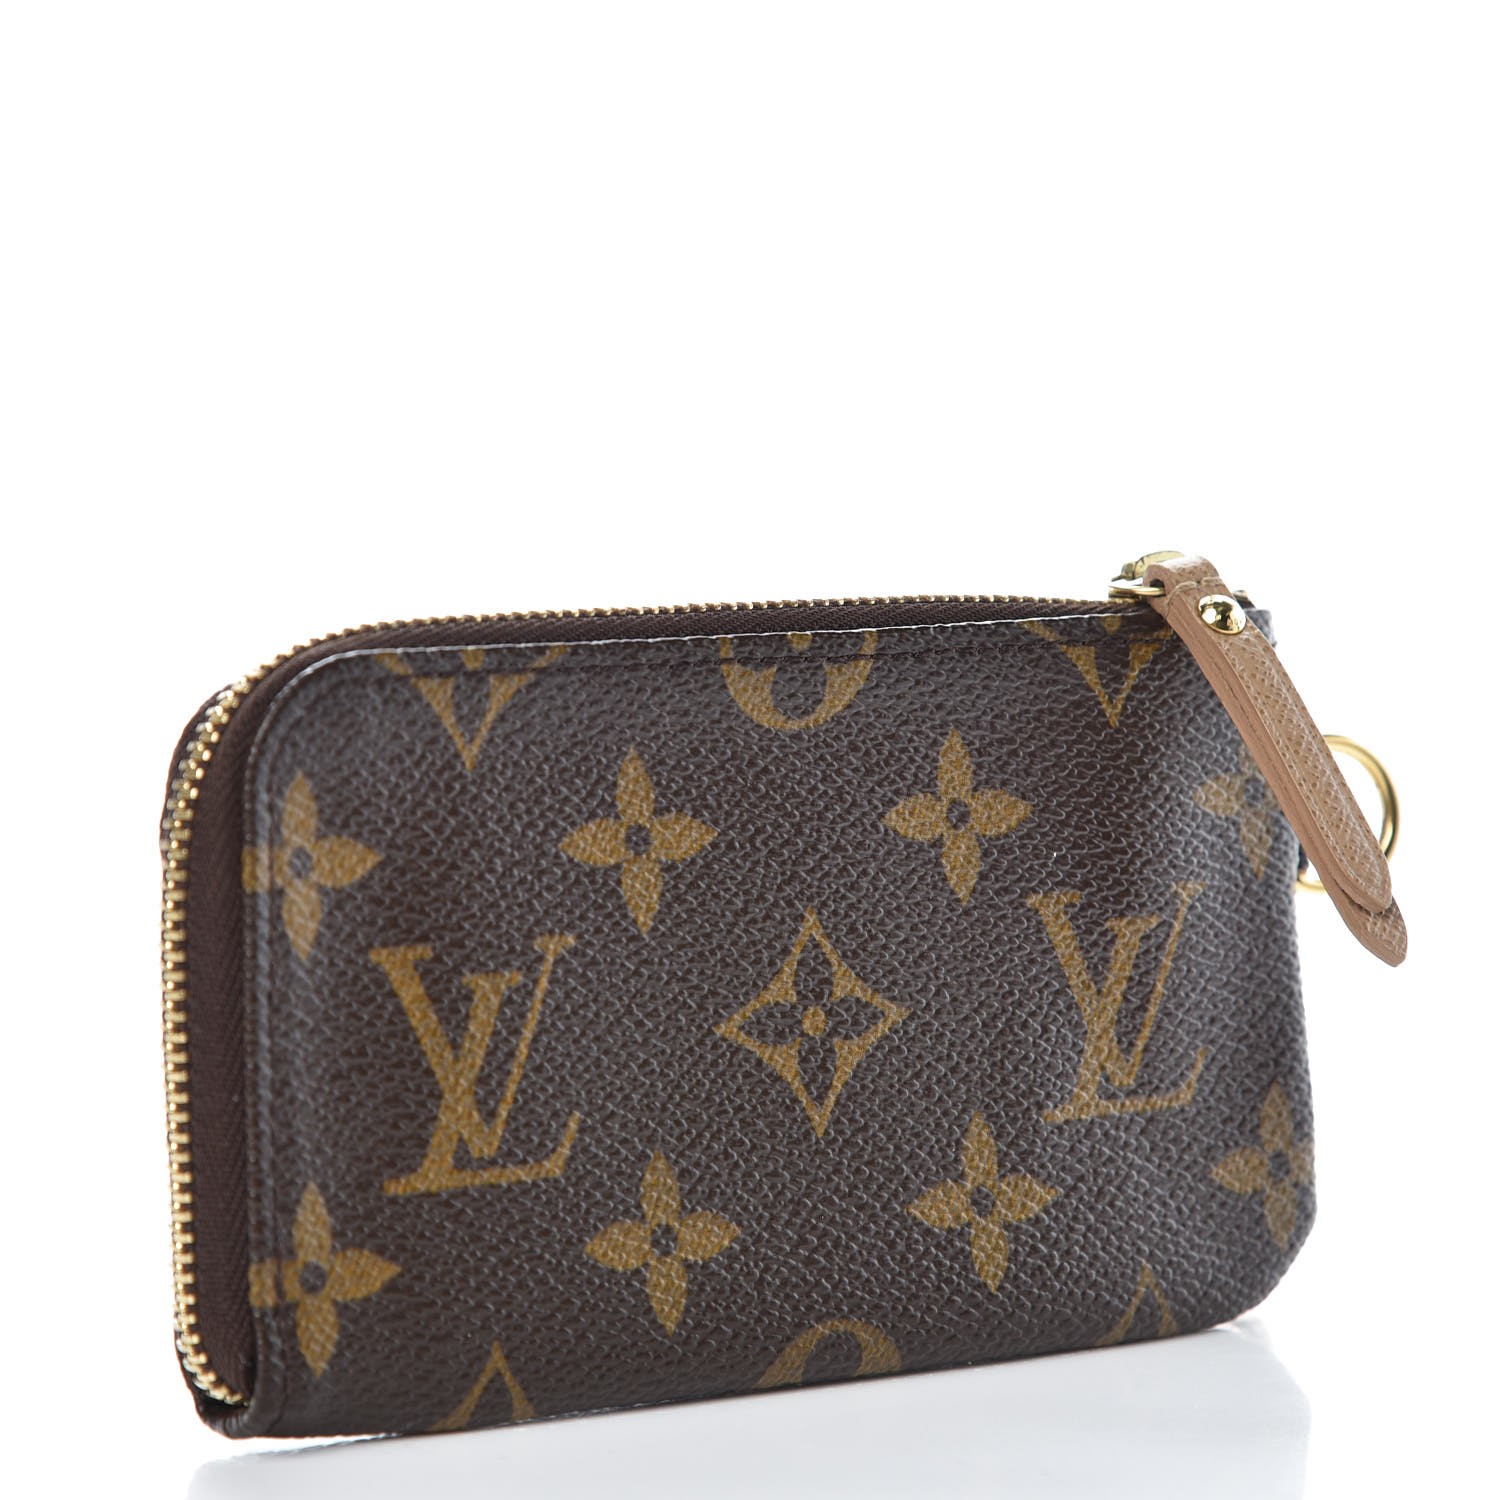 LOUIS VUITTON Monogram Complice Trunks and Bags Key Pouch 350820